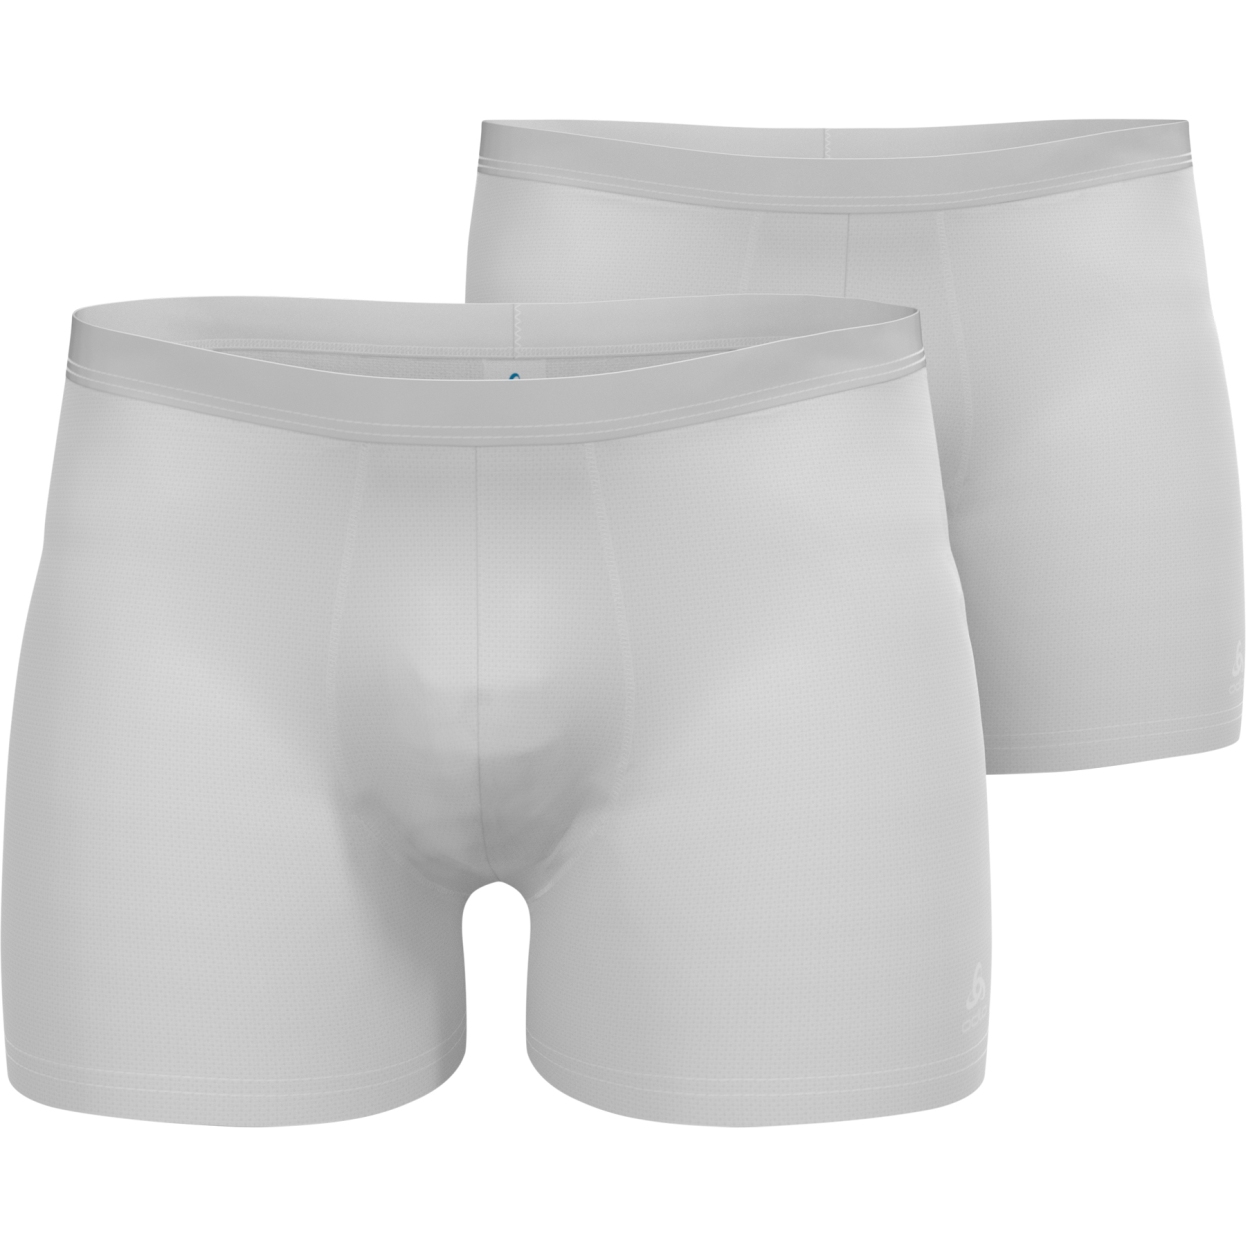 Picture of Odlo Active F-Dry Light Boxers Men - 2 Pack - white